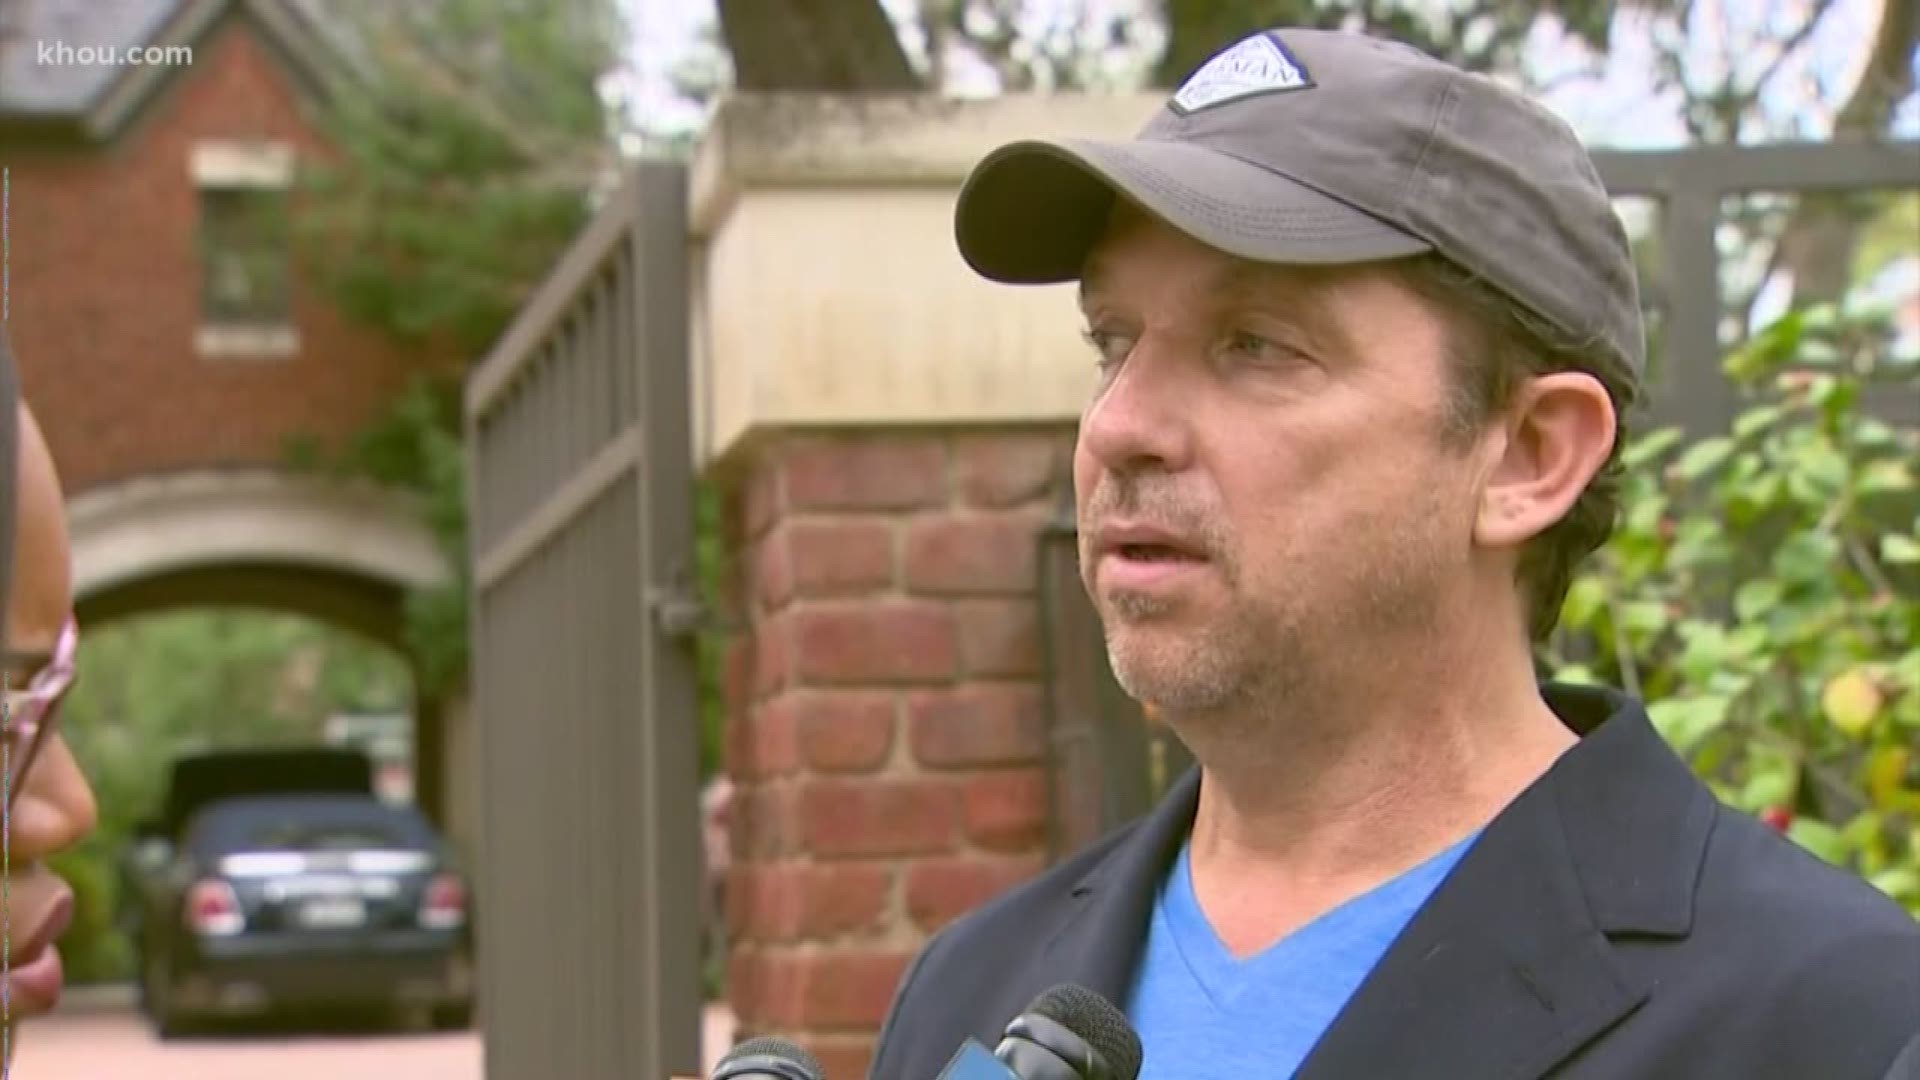 Houston mayoral candidate Tony Buzbee says he caught a burglar inside his River Oaks home early Monday.

Buzbee’s son and daughter were home at the time.

“Luckily I was armed, and ran the subject out of my home,” Buzbee said on Facebook. “But for the fact that my weapon misfired, I would have shot one of them.”